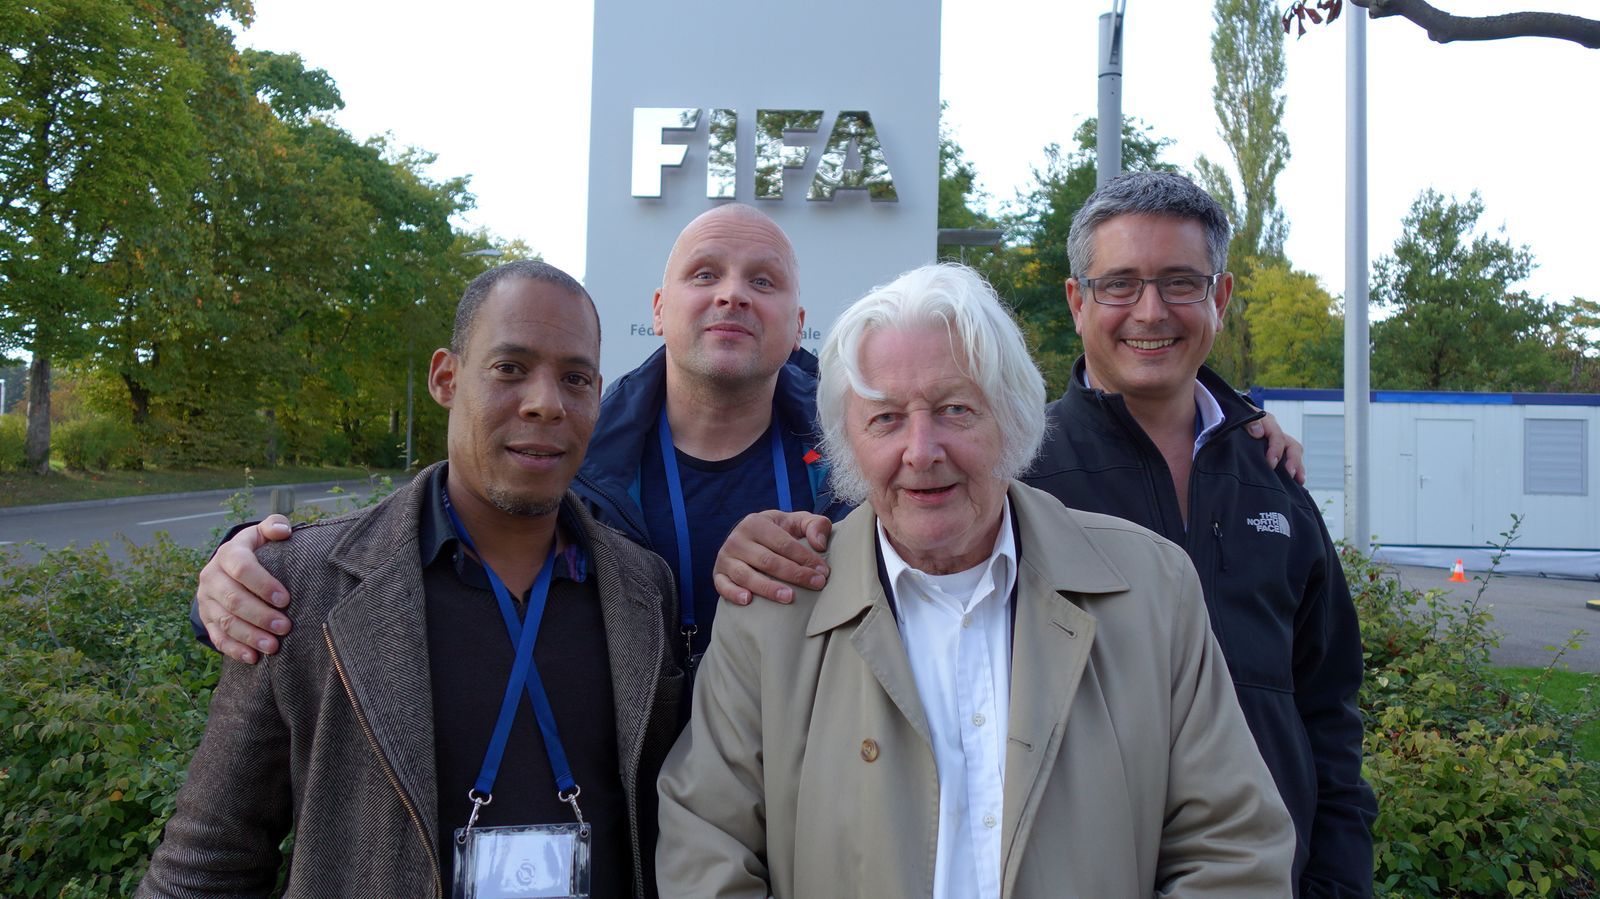 His last trip to Zurich, shortly before the stroke: Jean François Tanda, Jens Weinreich, Andrew Jennings, James Oliver.